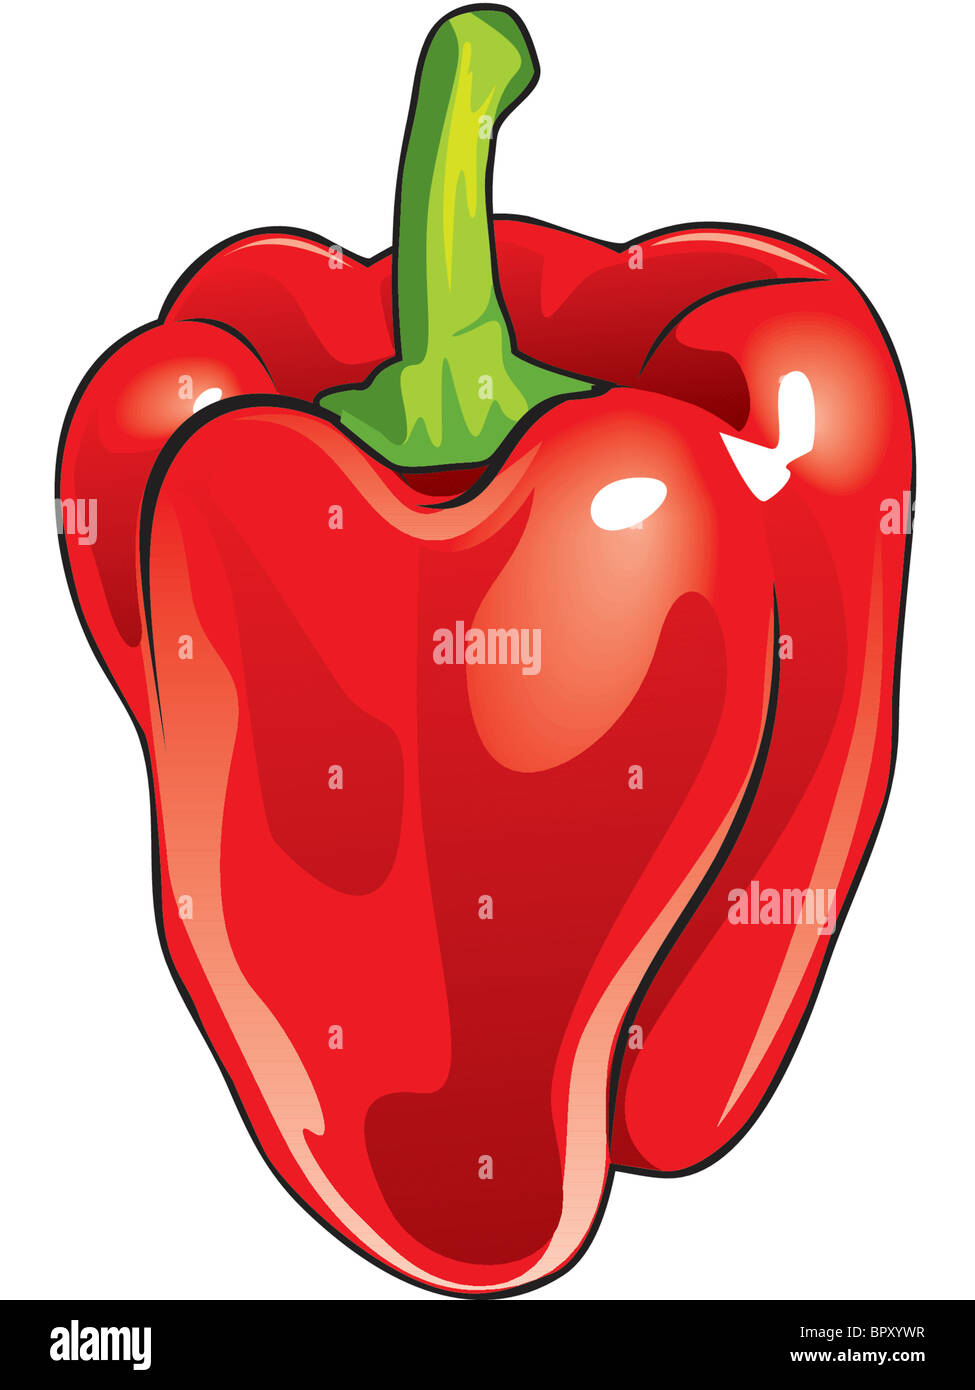 Drawing of a red bell pepper Stock Photo - Alamy